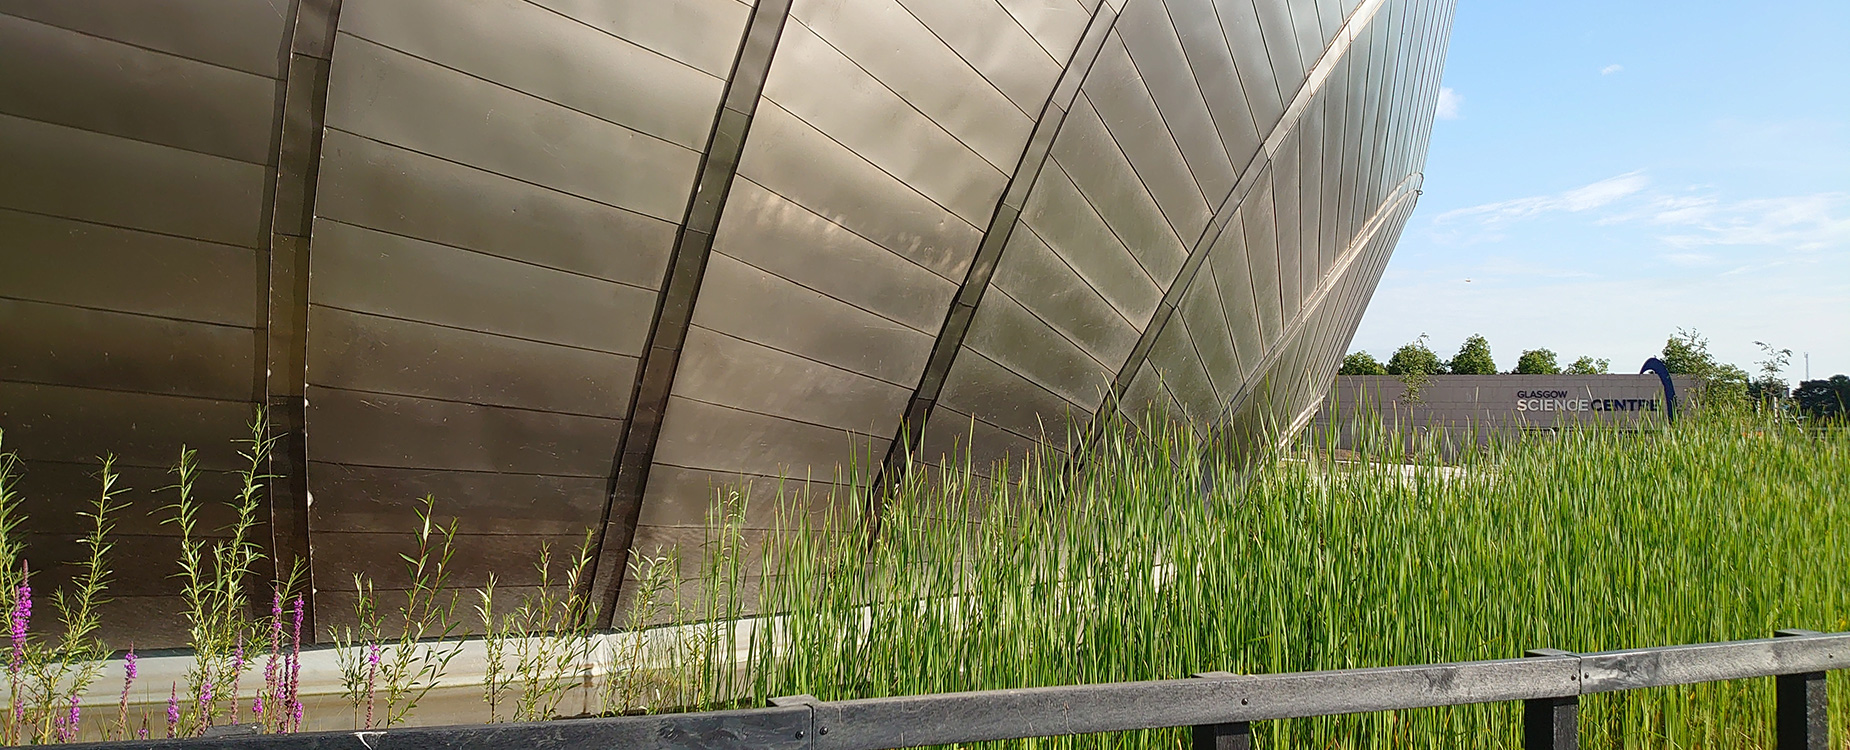 The silver dome of the IMAX building surrounded by green and purple wetland plants